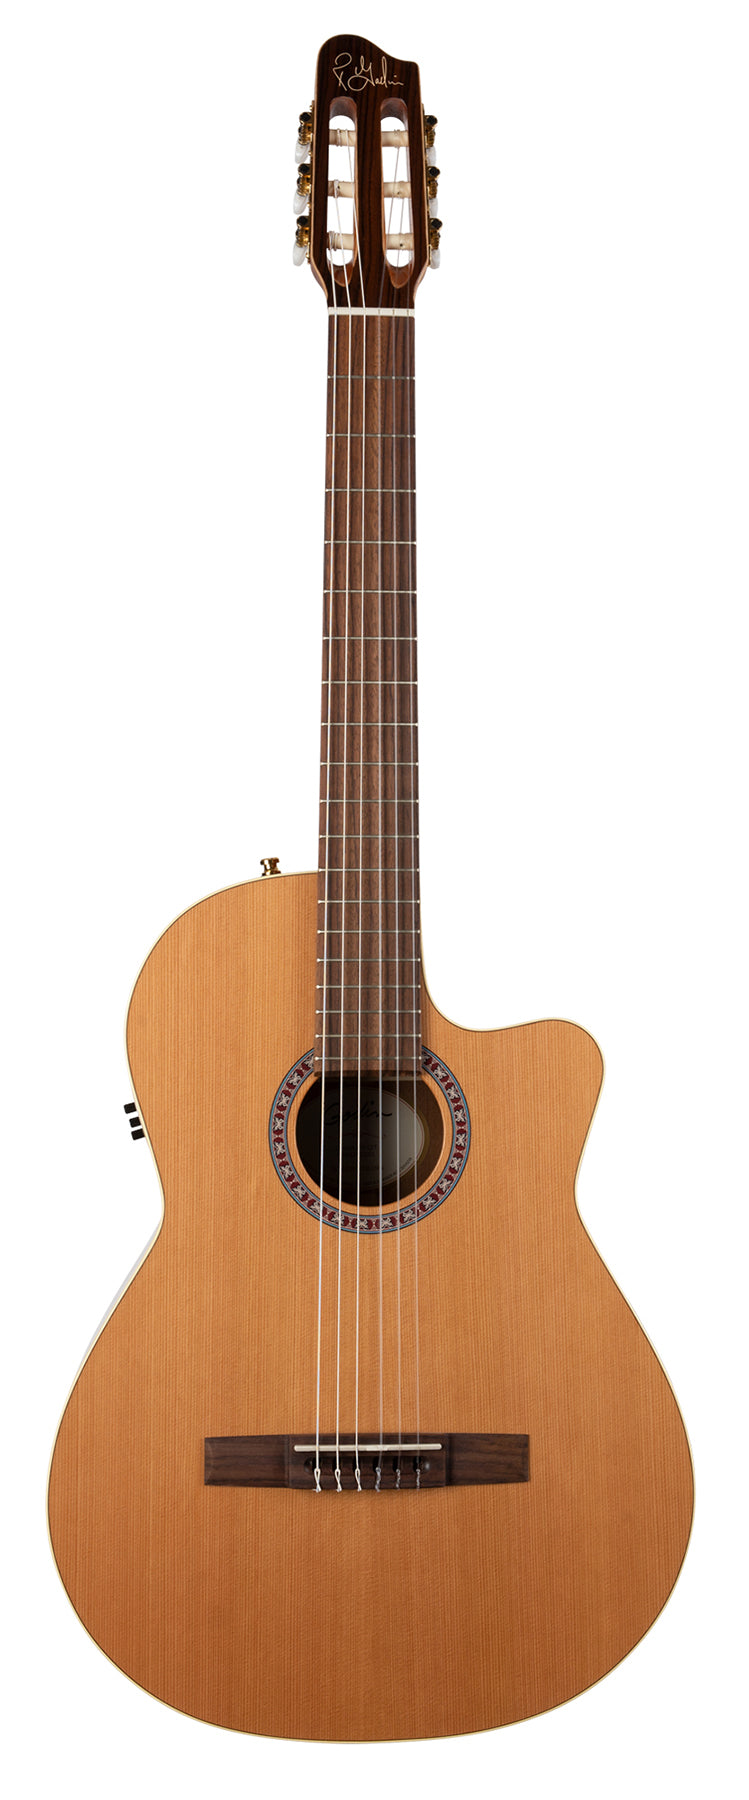 Godin 049653 / 051830 Concert CW QIT Acoustic Electric Cutaway Classical Guitar MADE In CANADA